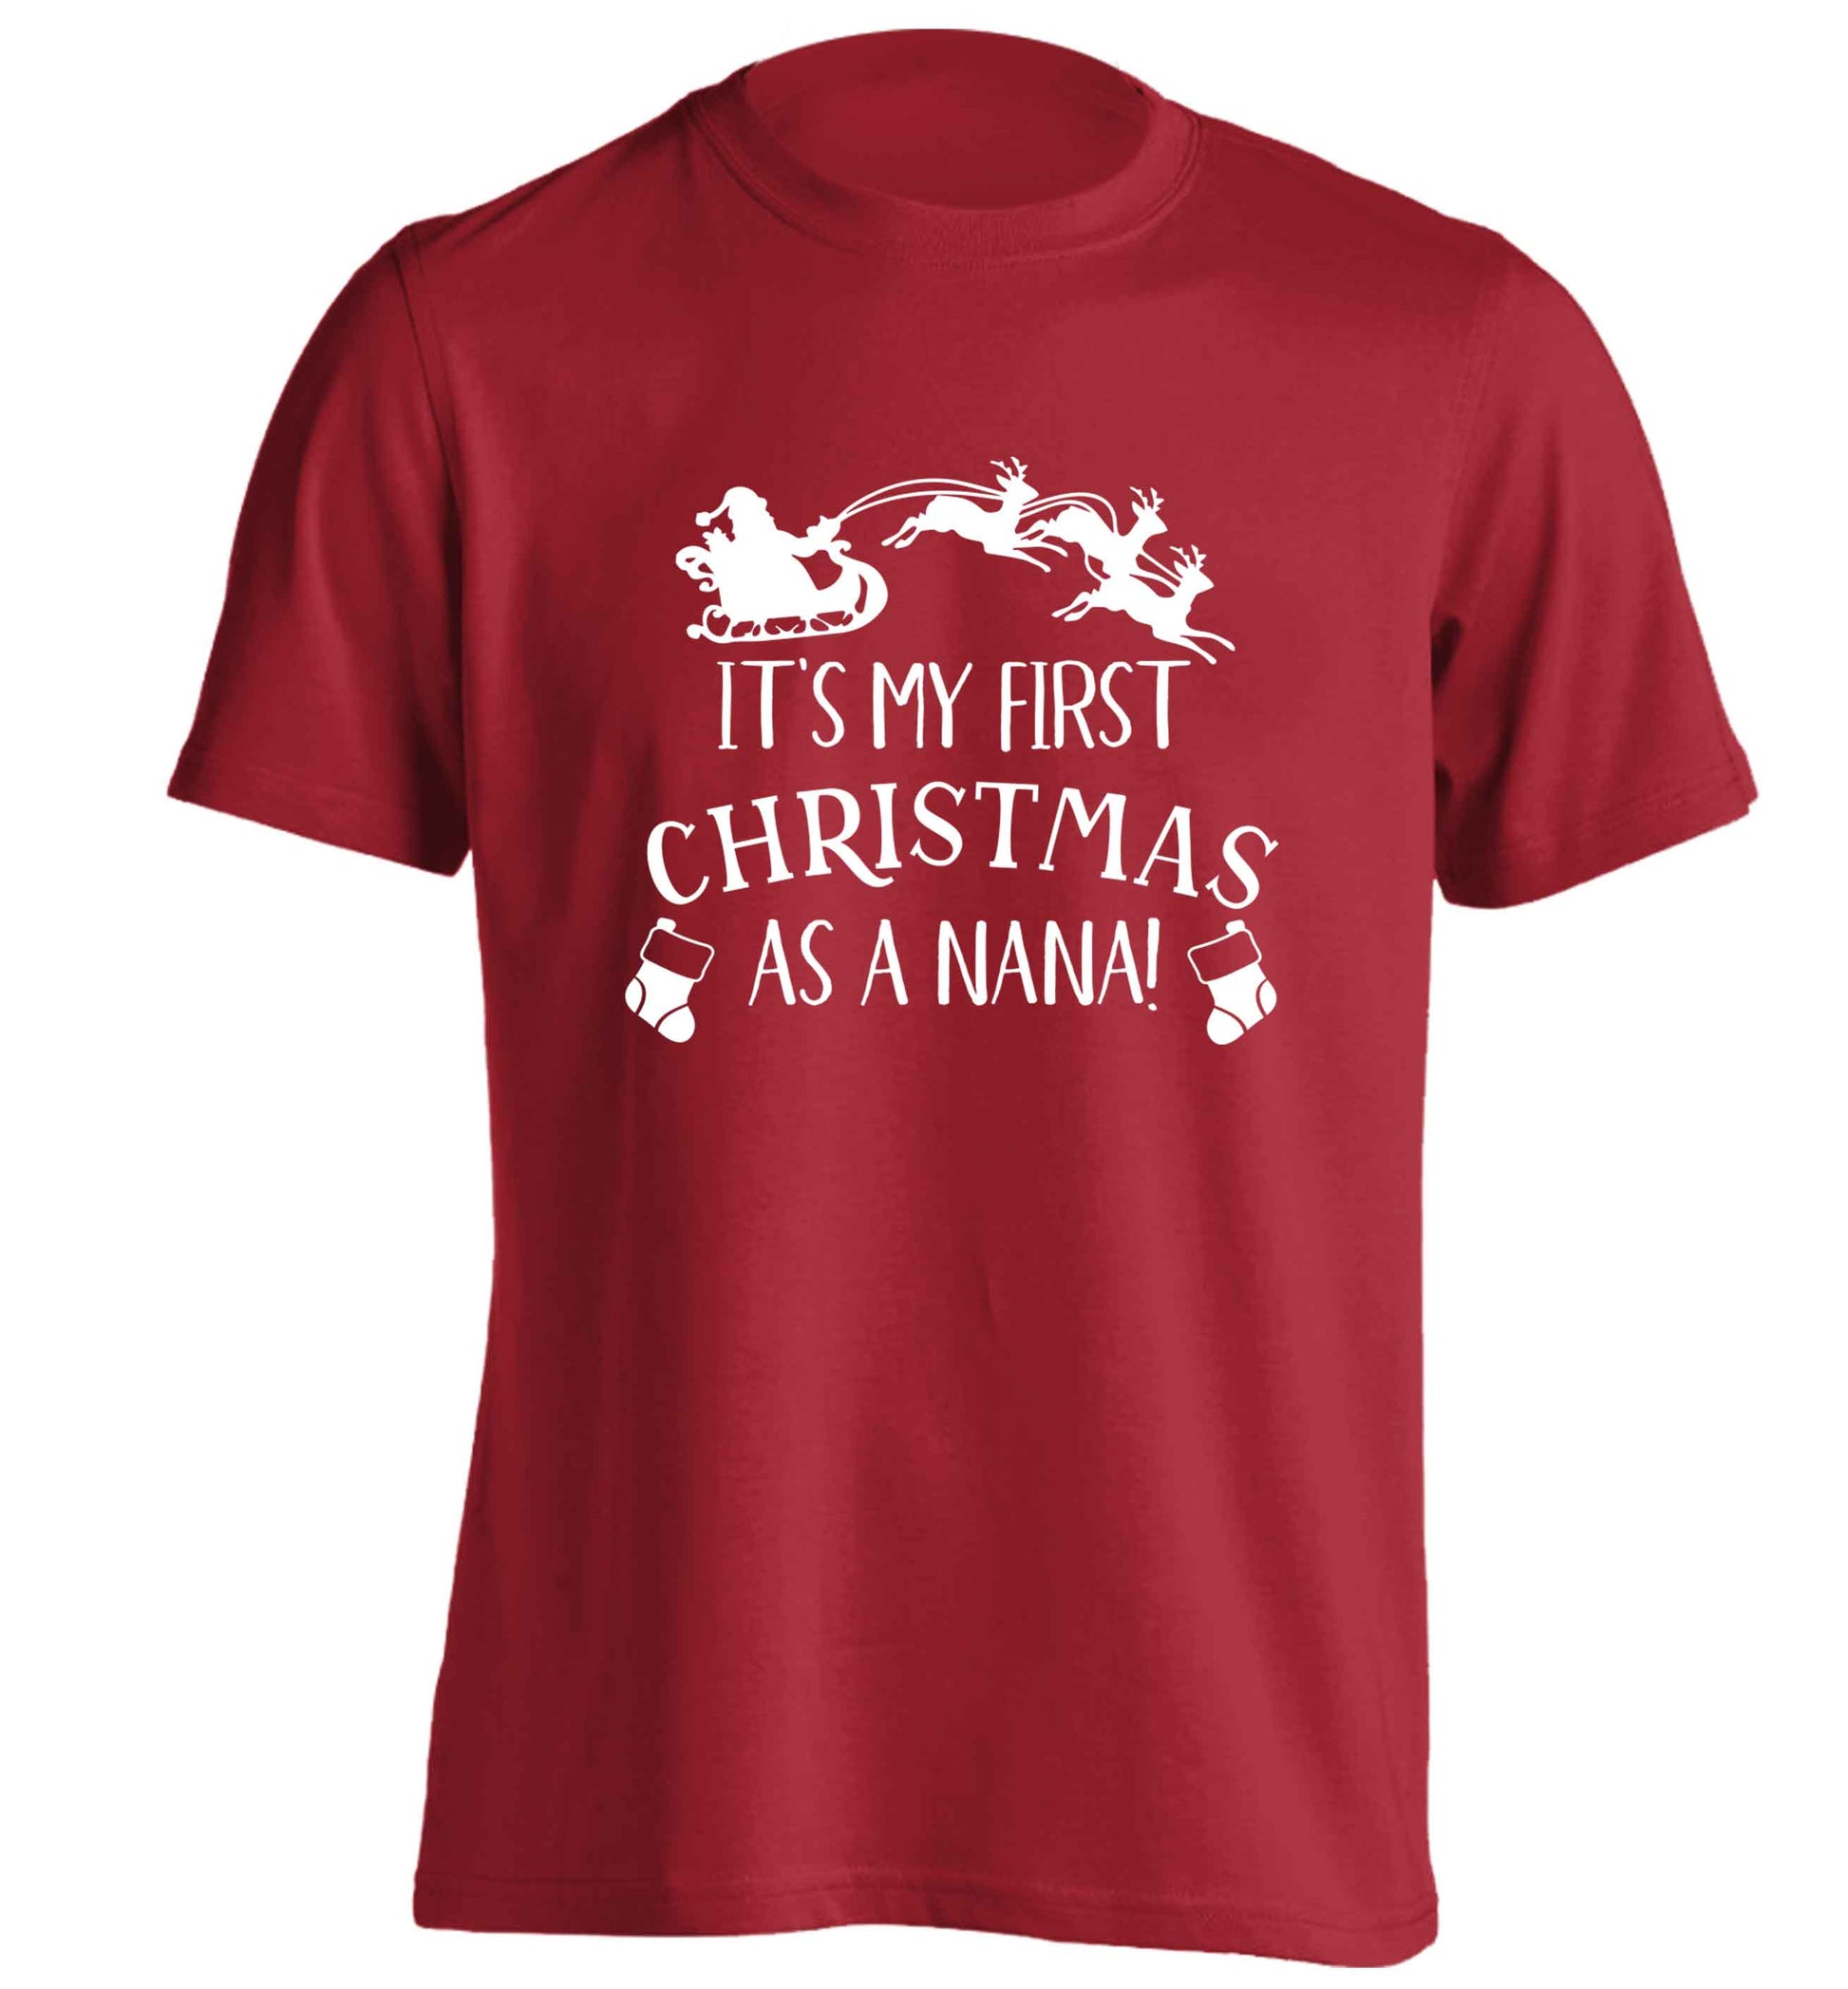 It's my first Christmas as a nana adults unisex red Tshirt 2XL